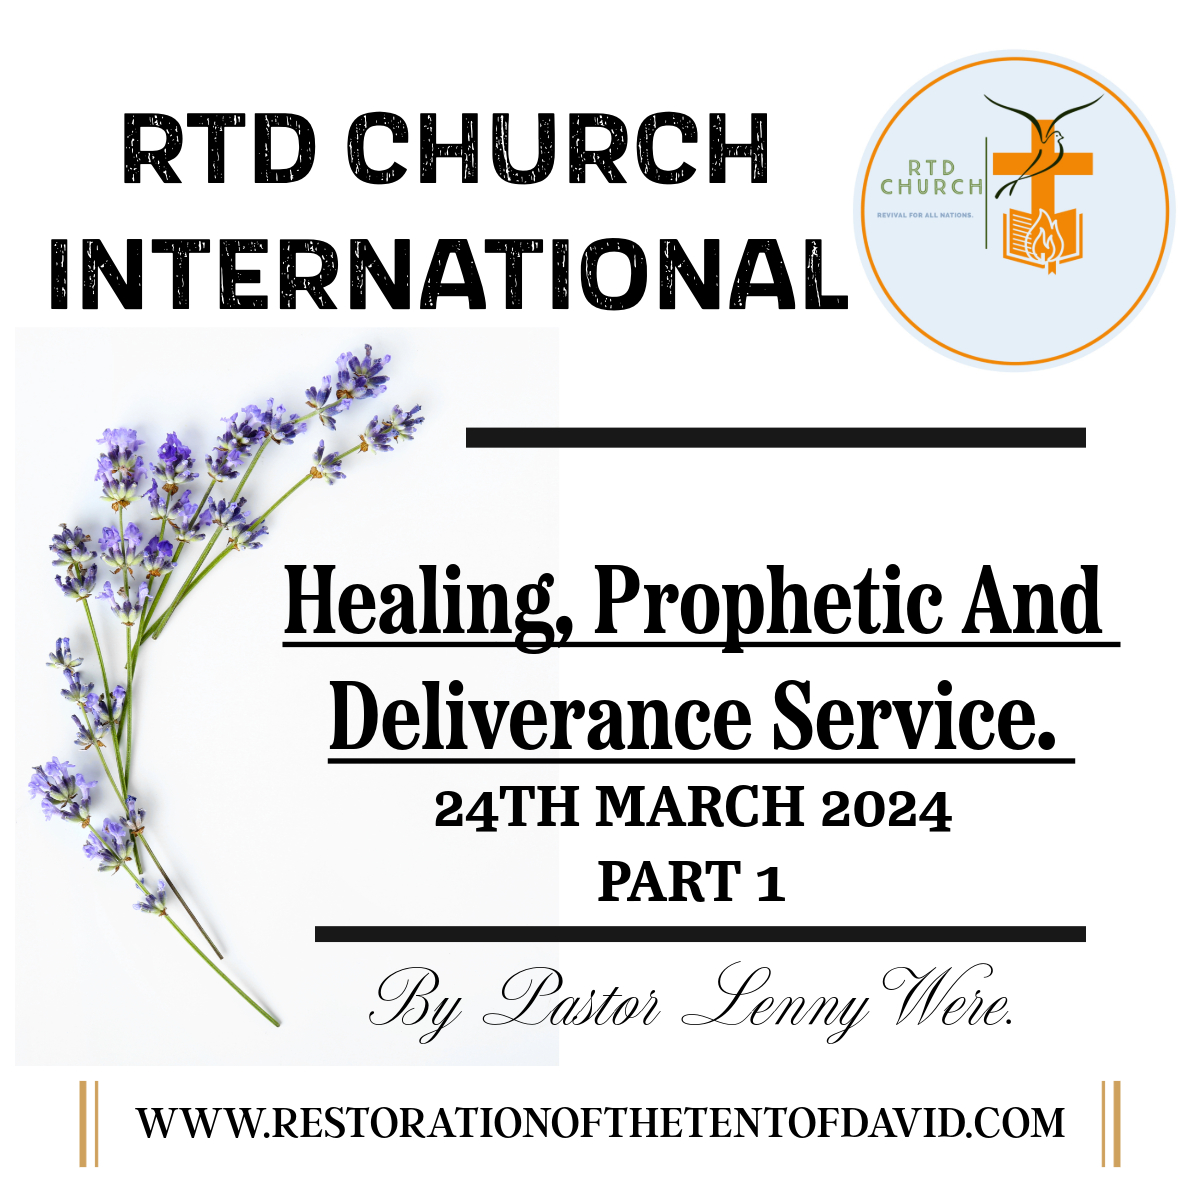 HEALING, PROPHETIC AND DELIVERANCE SERVICE. 24TH FEBRUARY 2024. PART 1.